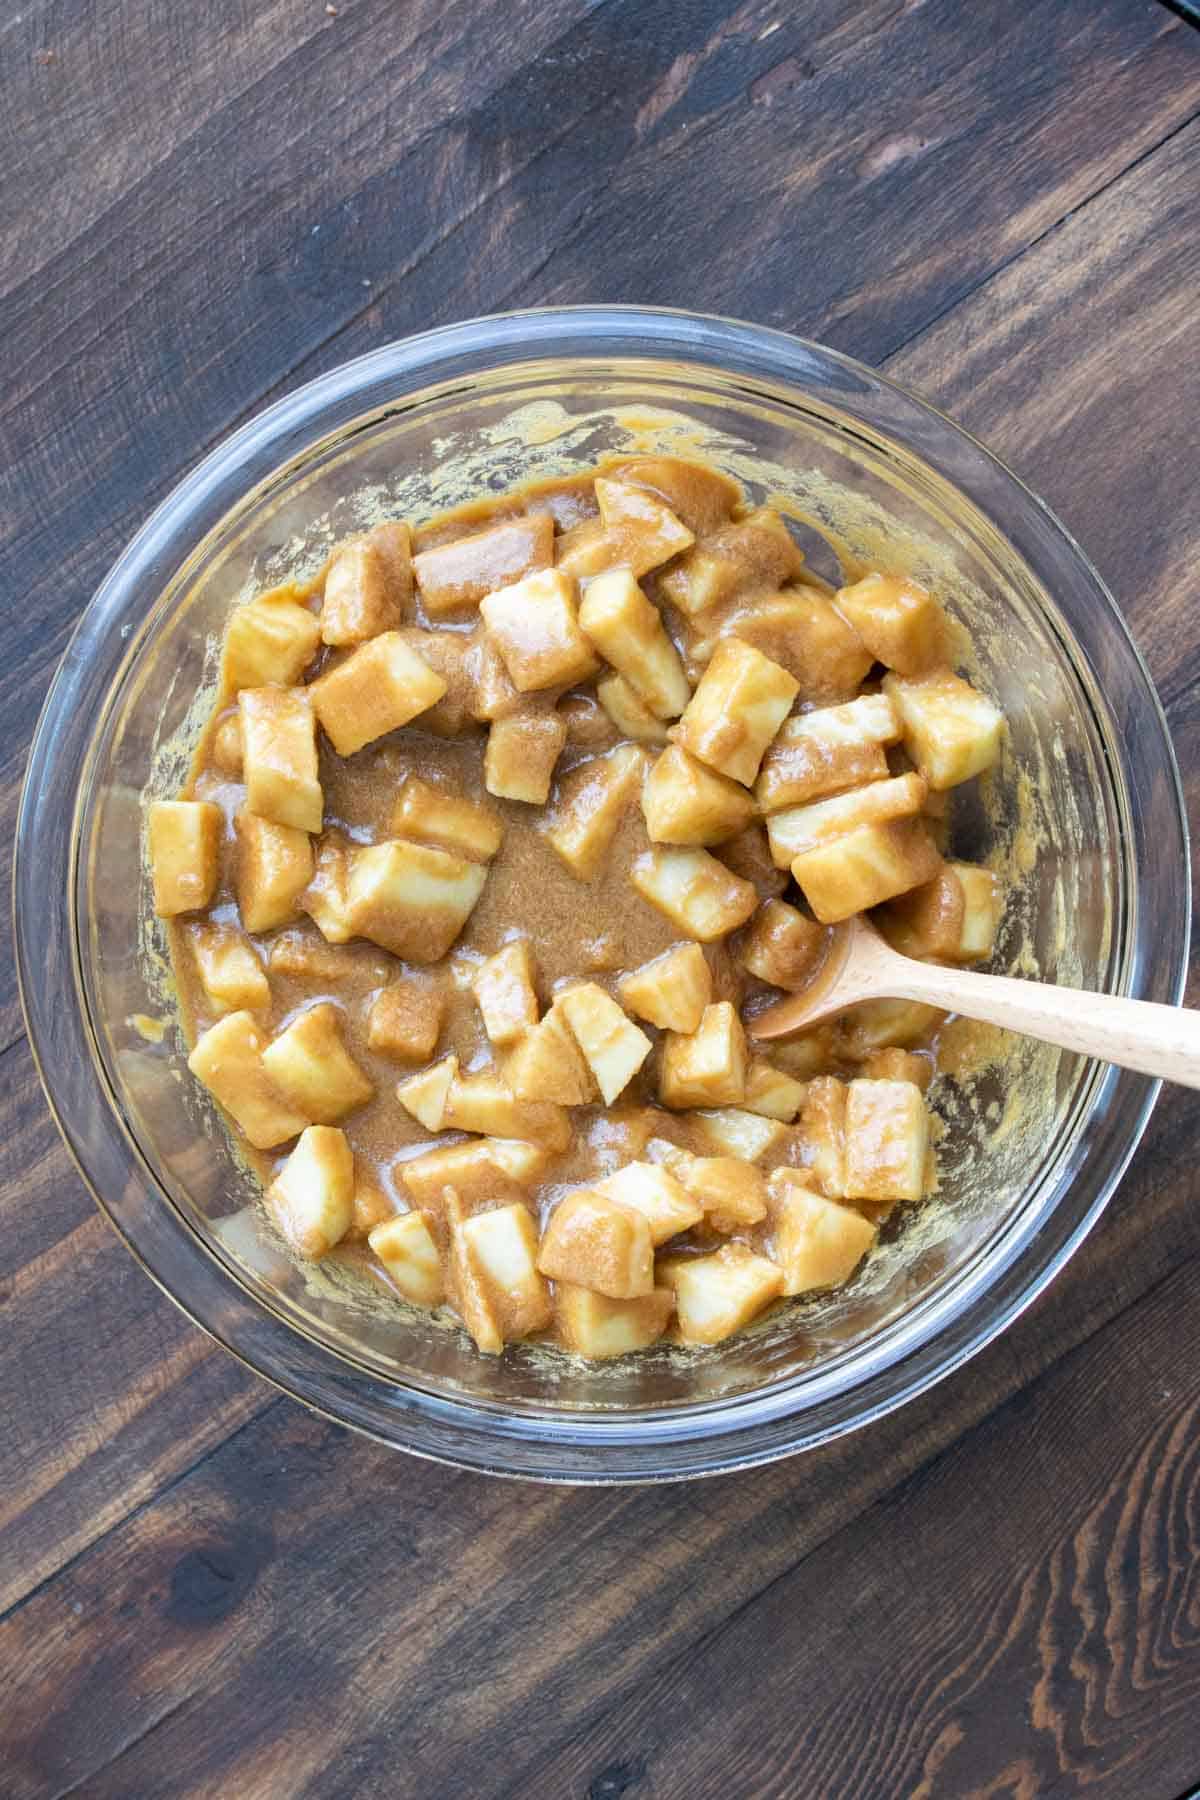 Spoon mixing apples and caramel mixture in a glass bowl.